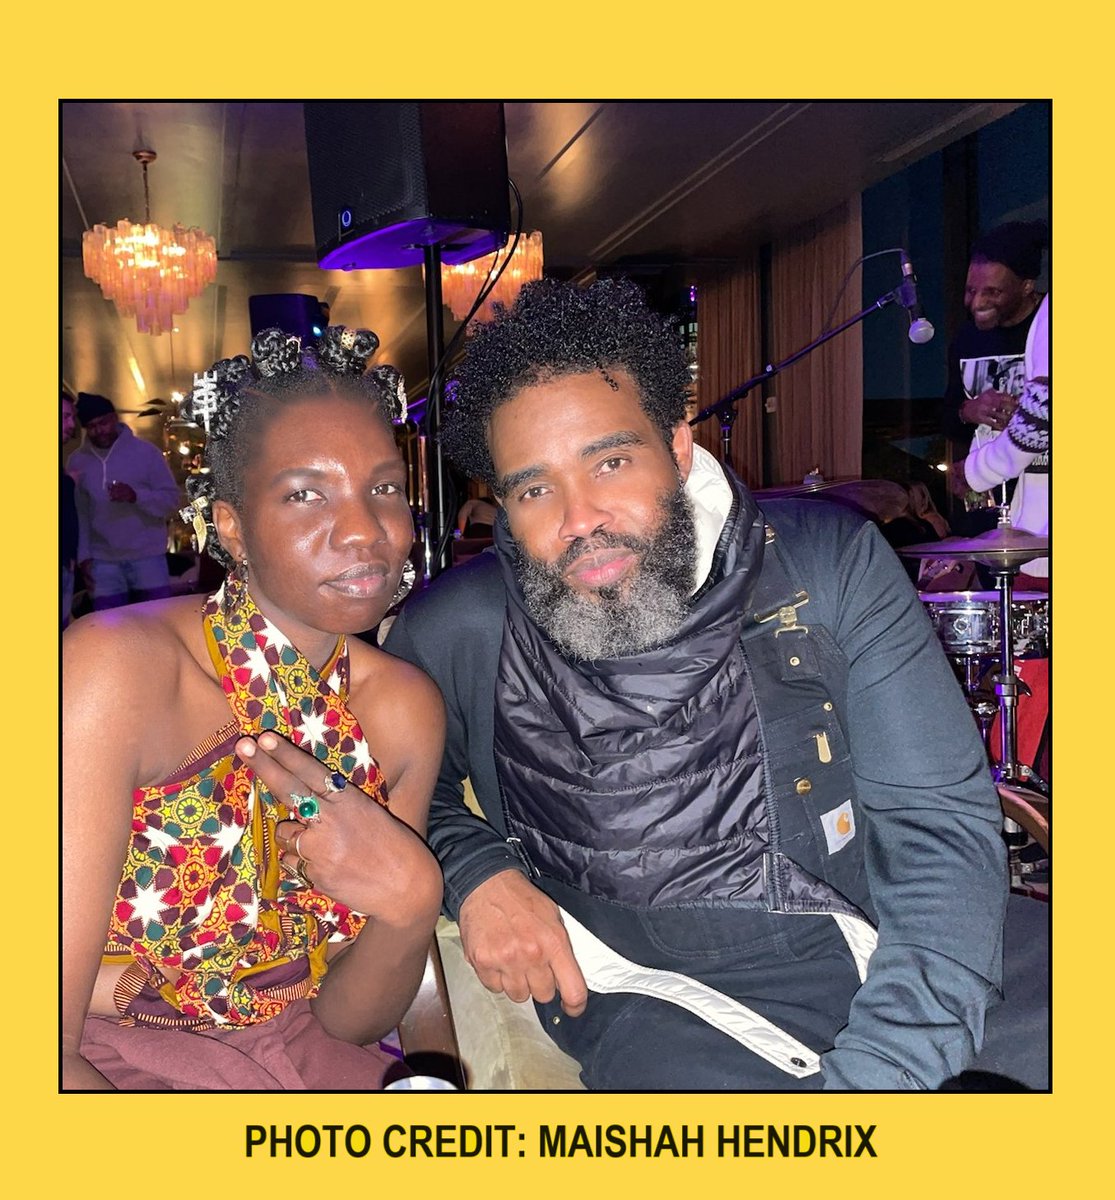 honored to share the creatively esteemed @pharoahemonch wrote the foreword for my upcoming book being published by @WahidaClark!!! thank you for your honesty about mental health experiences & the power of the hip-hop community. much love @ZoiEllis 👑 💛: emiliaottoo.com